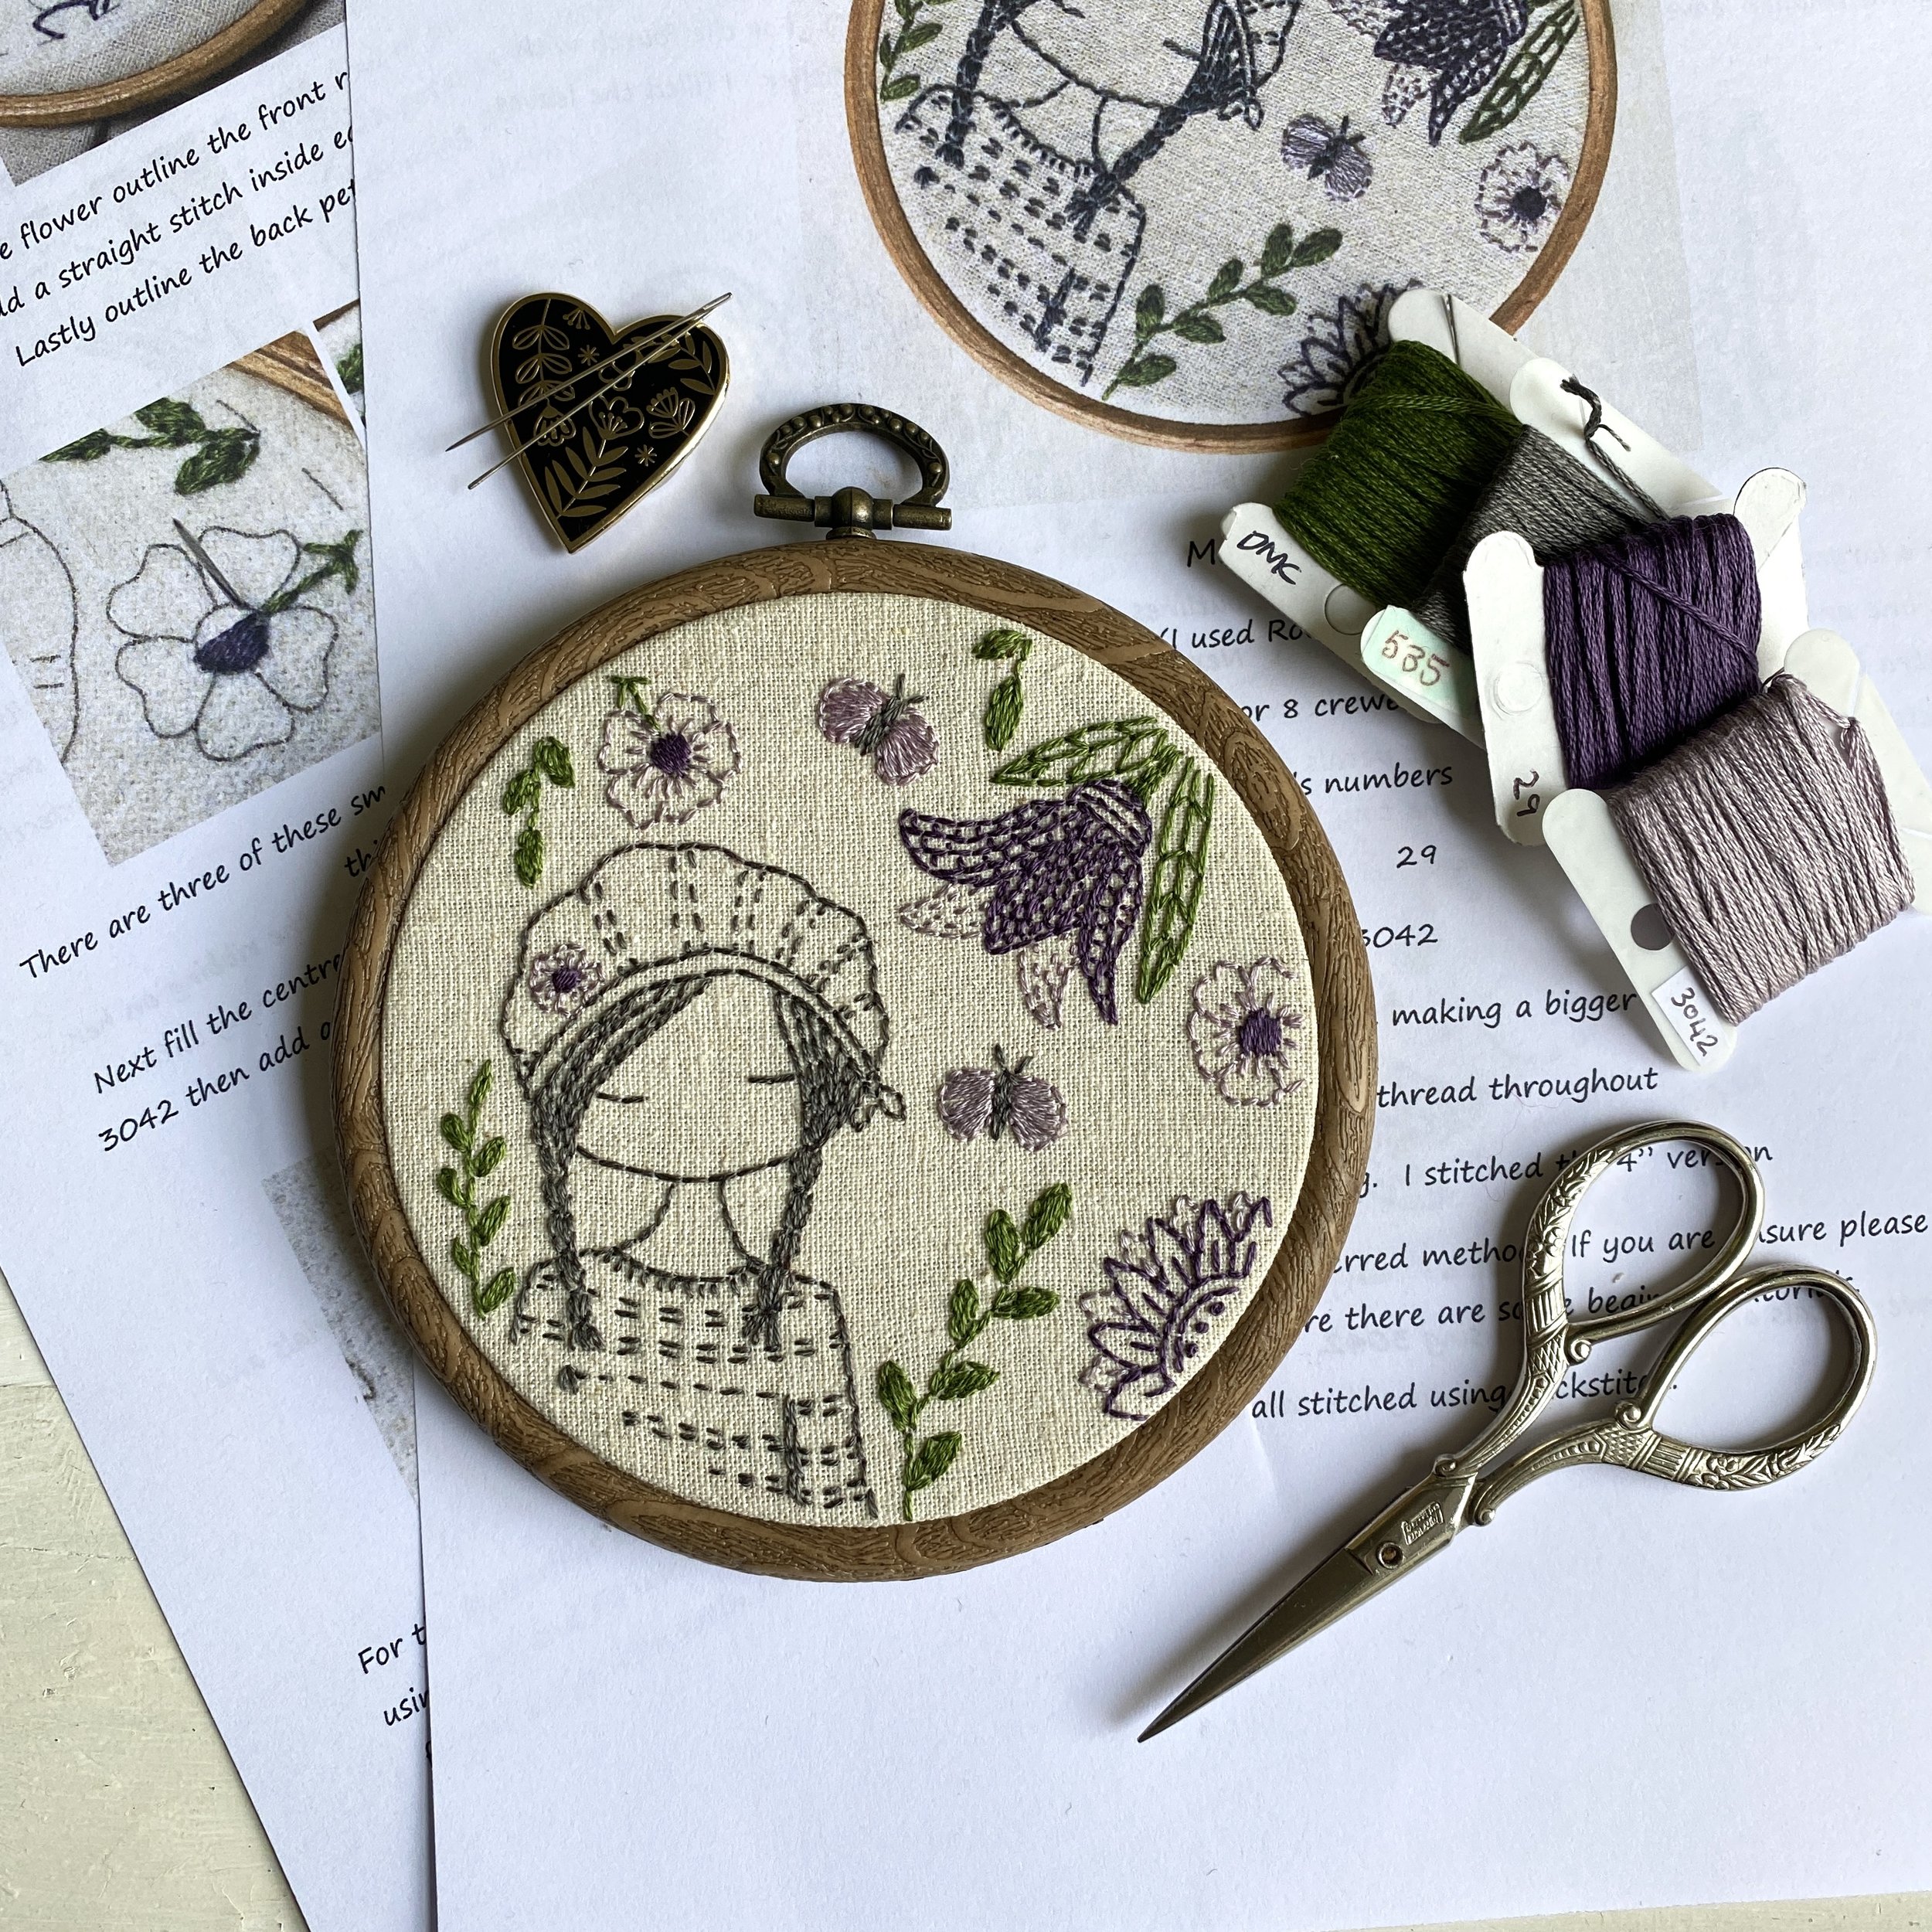 Embroidery Basics: Transferring a Pattern using Water Soluble